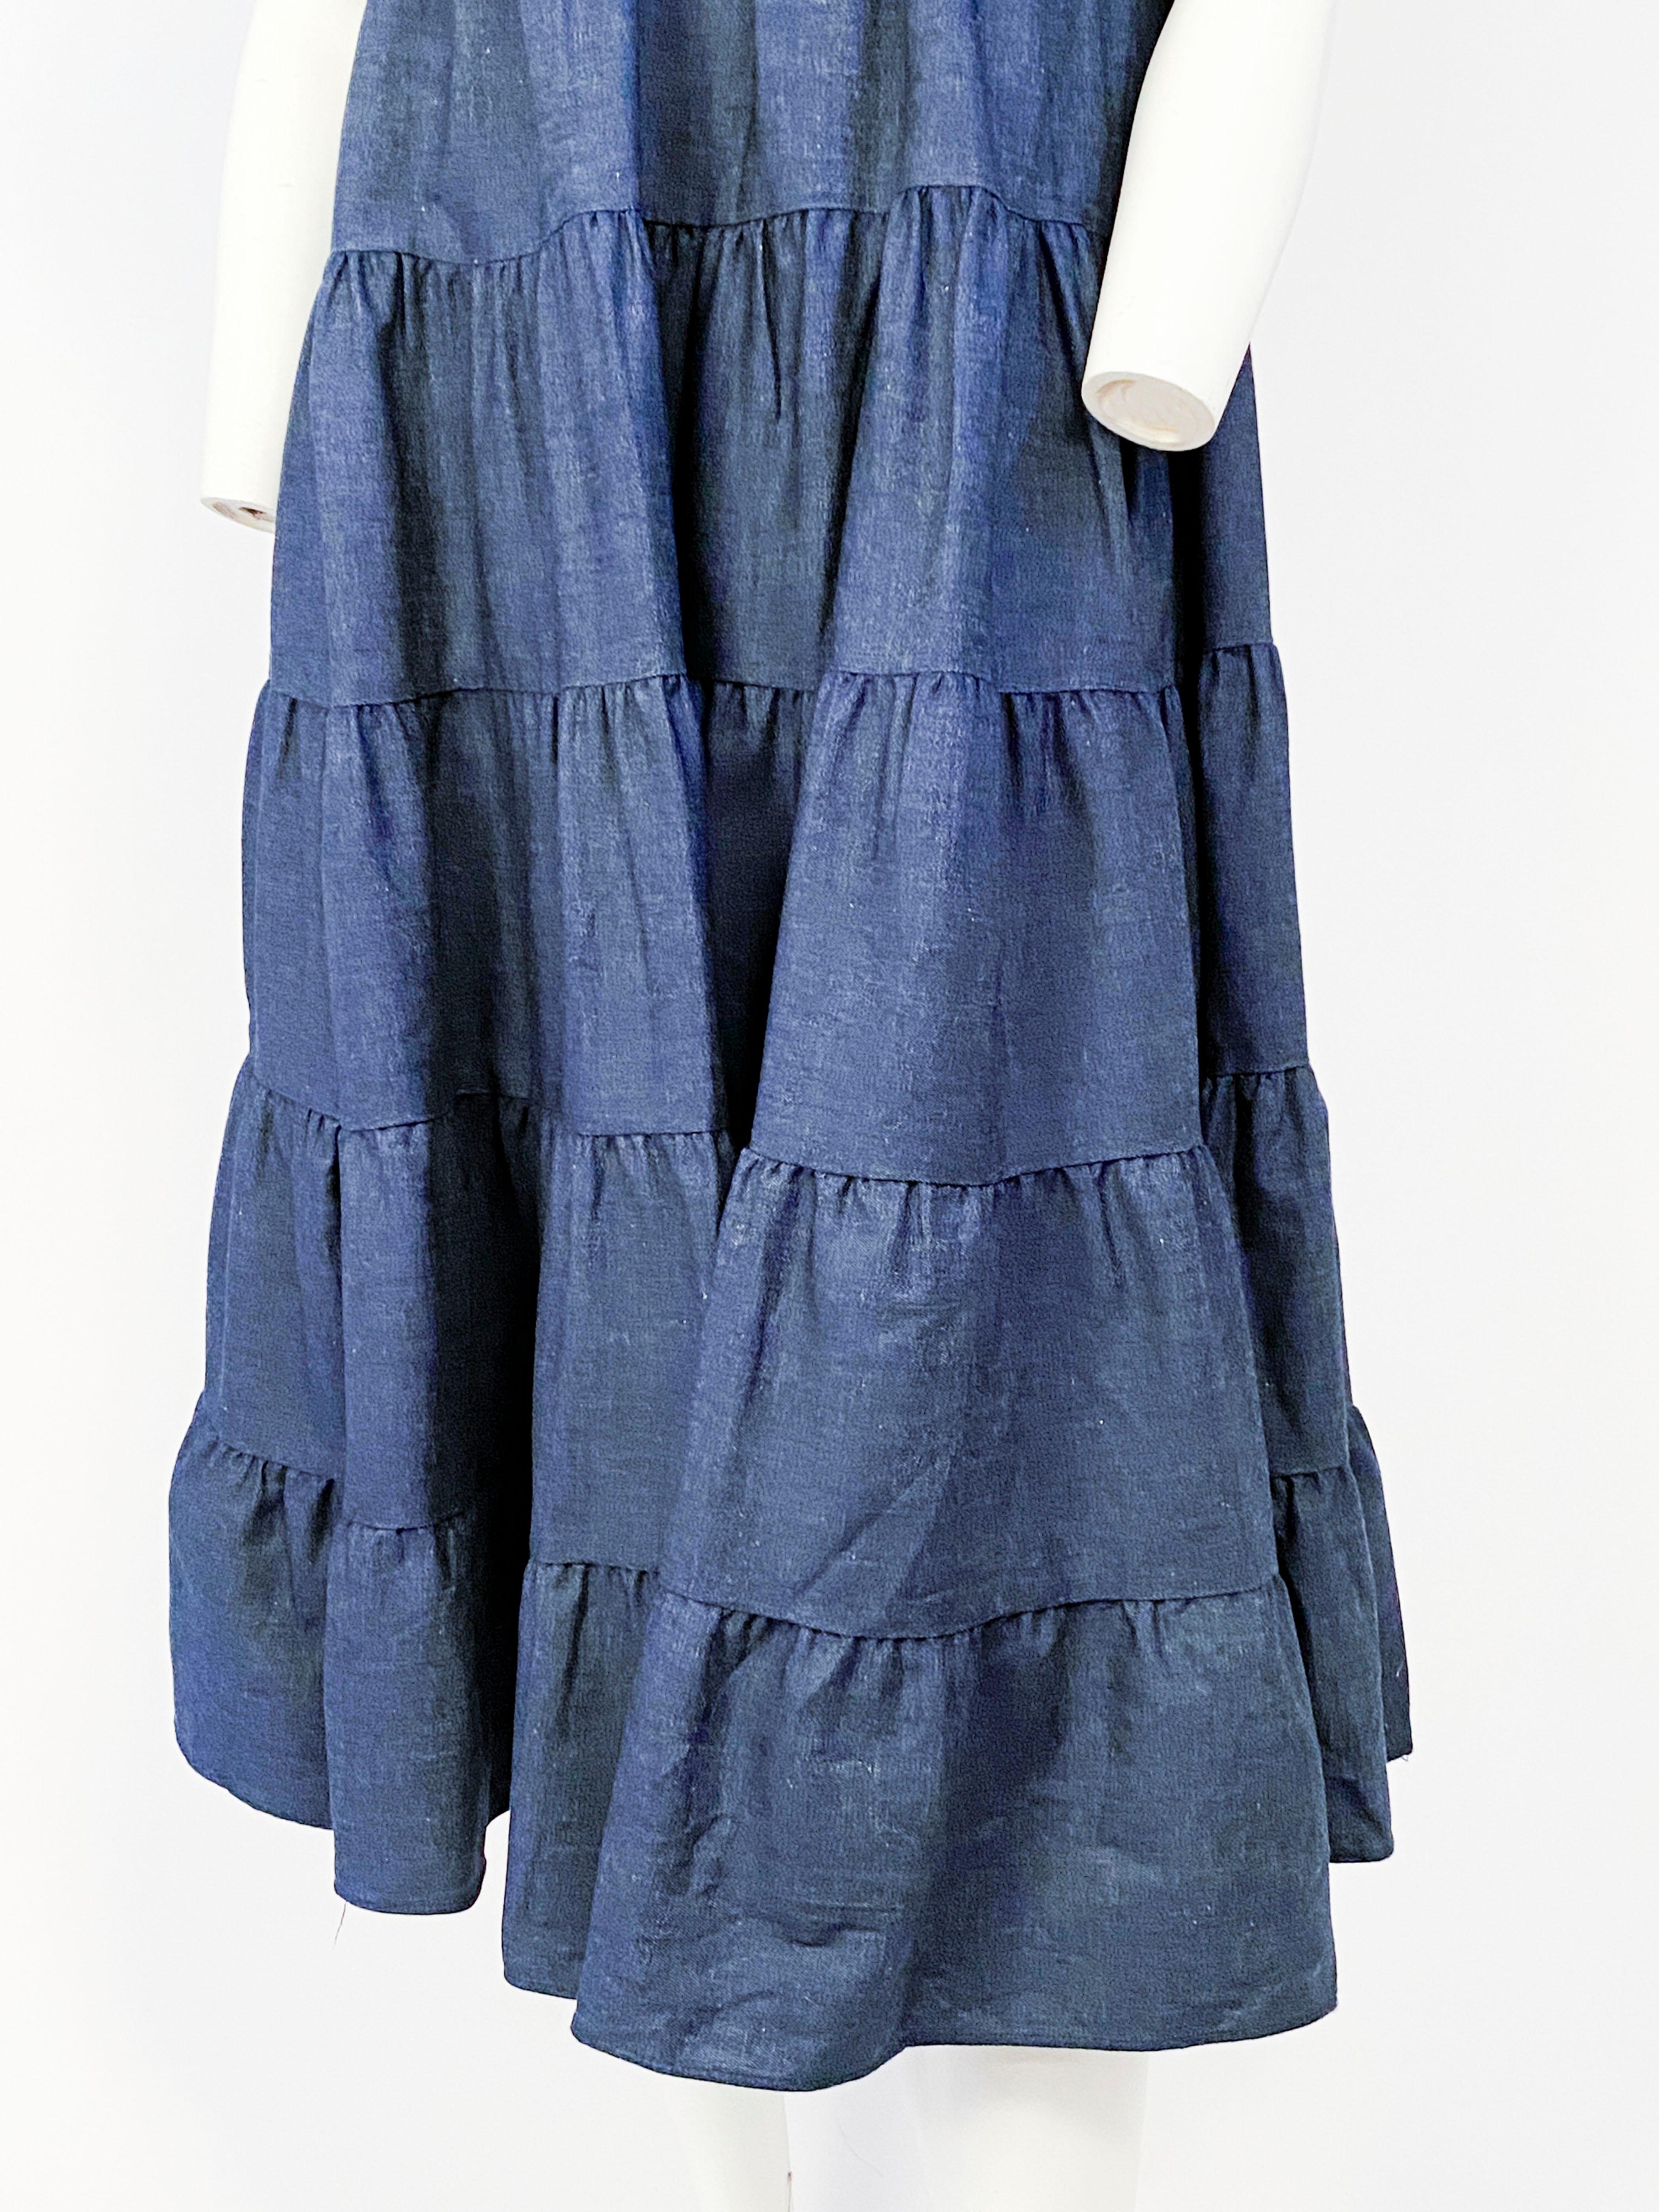 1970s denim dress with layered rows of ruffled denim along the high empire-waisted skirt. The scoop neckline accentuates the full puffed short sleeves. 